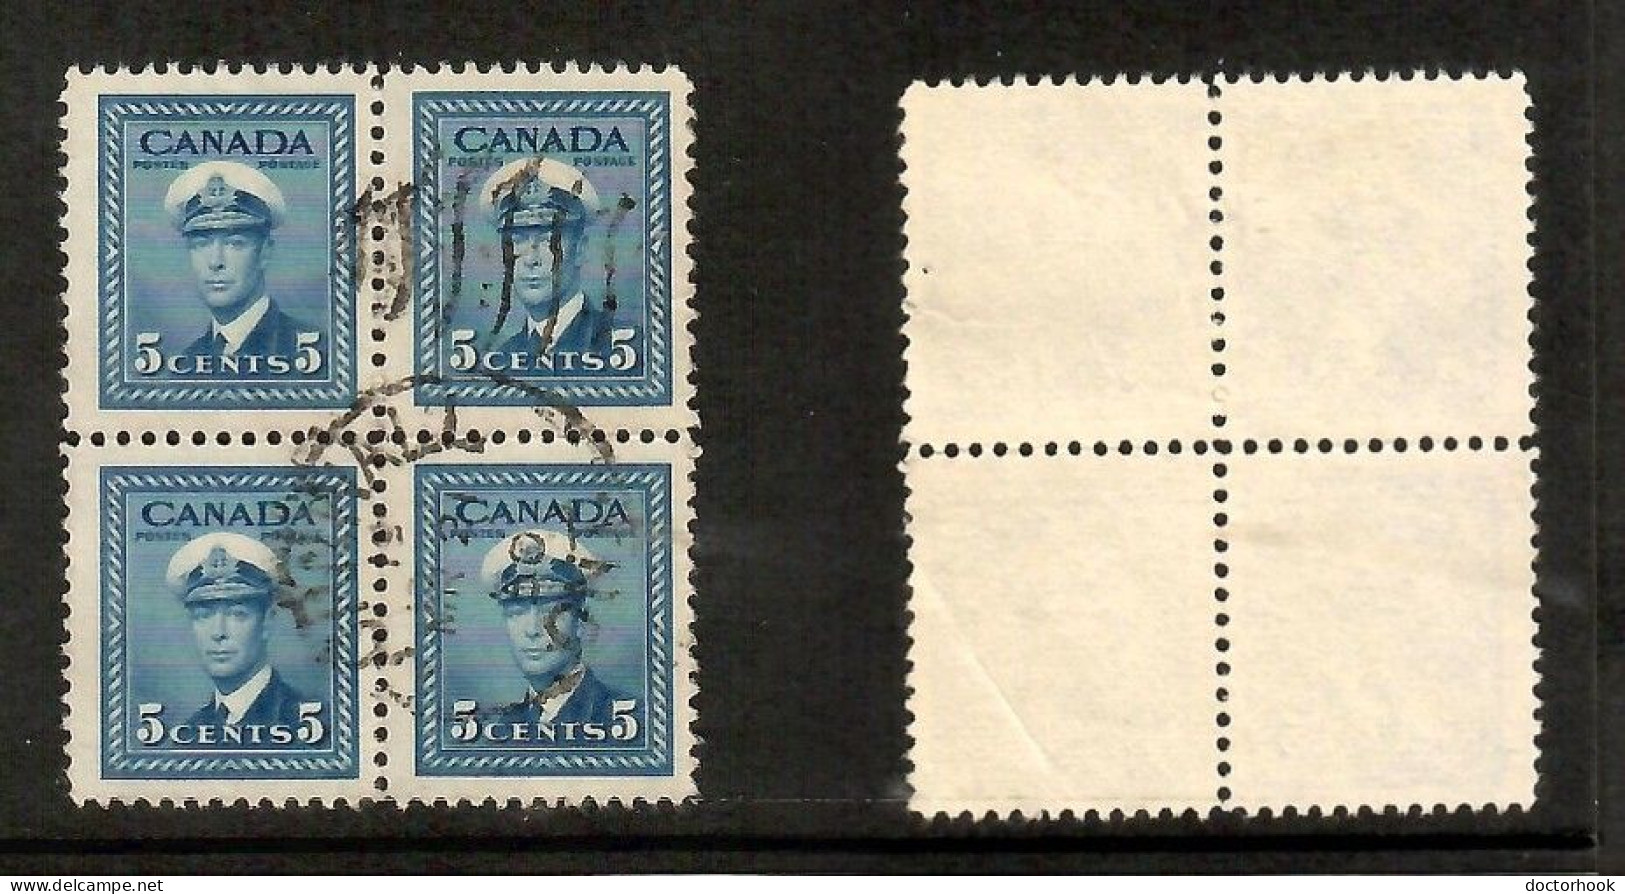 CANADA   Scott # 255 USED BLOCK Of 4 (CONDITION AS PER SCAN) (CAN-210) - Hojas Bloque